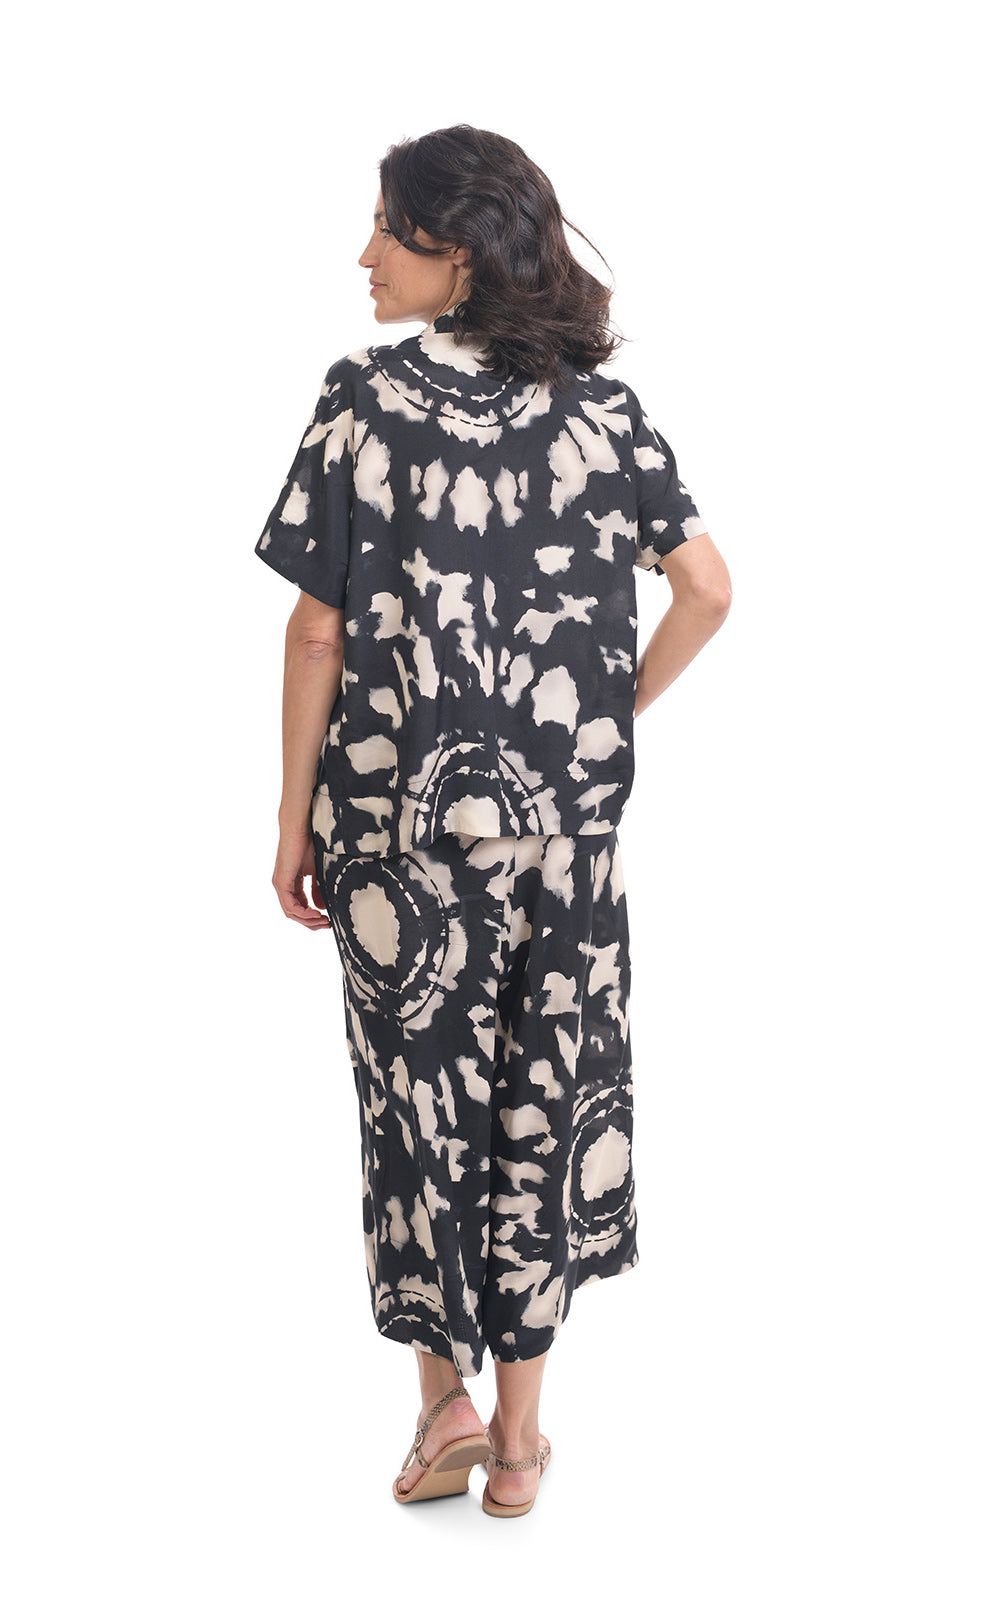 Back full body view of a woman wearing the alembika mandala wide pant and the alembika speckle mandala shirt. This shirt has a black and white mandala tie dye print, a boxy silhouette, and short sleeves. The wide pants have the same print as the top.